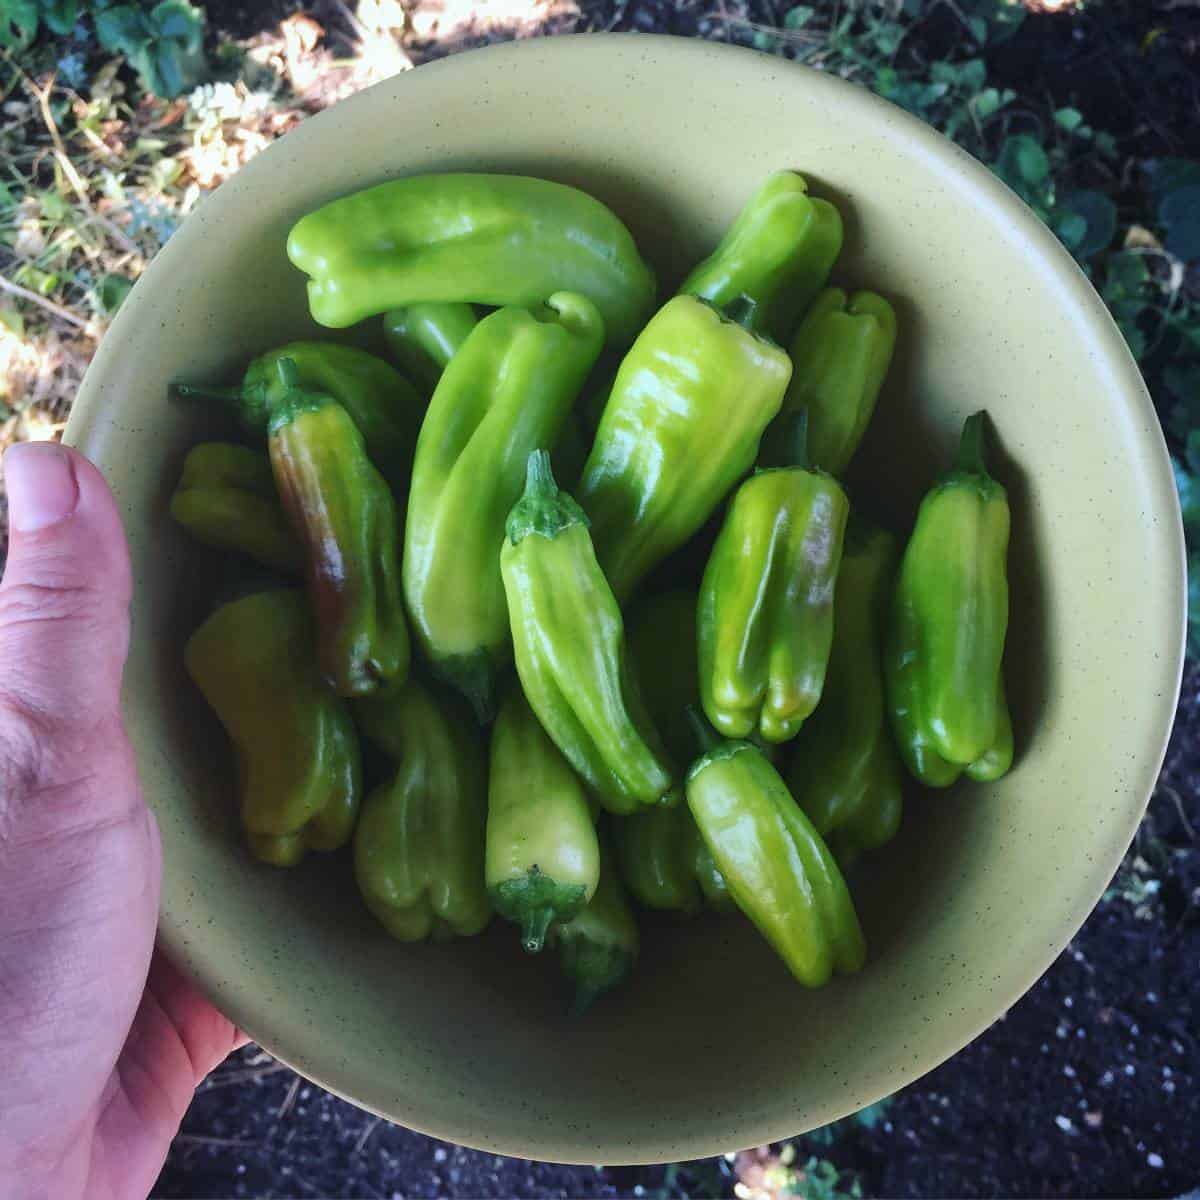 a hand holding a bowl full of freshly picked pepperoncini peppers